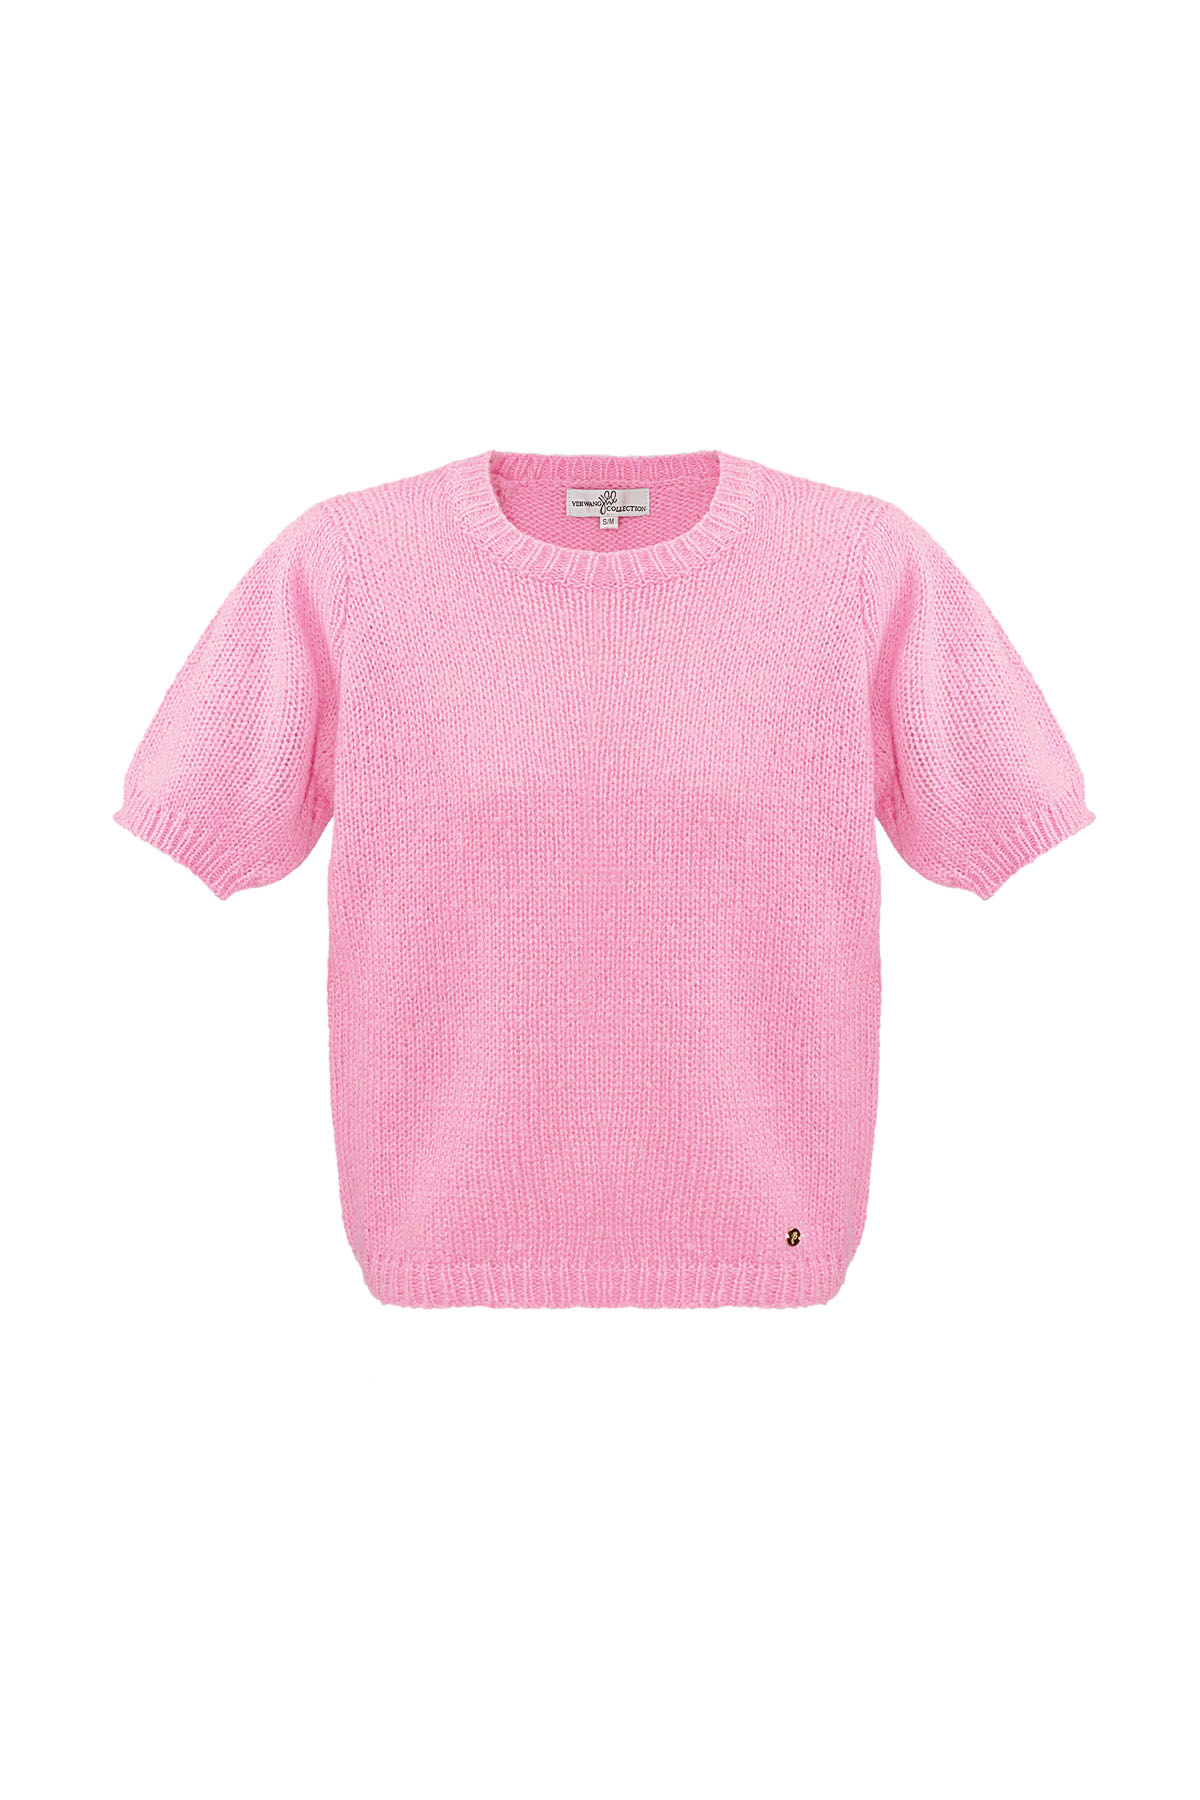 Basic shirt with puff sleeves - pink